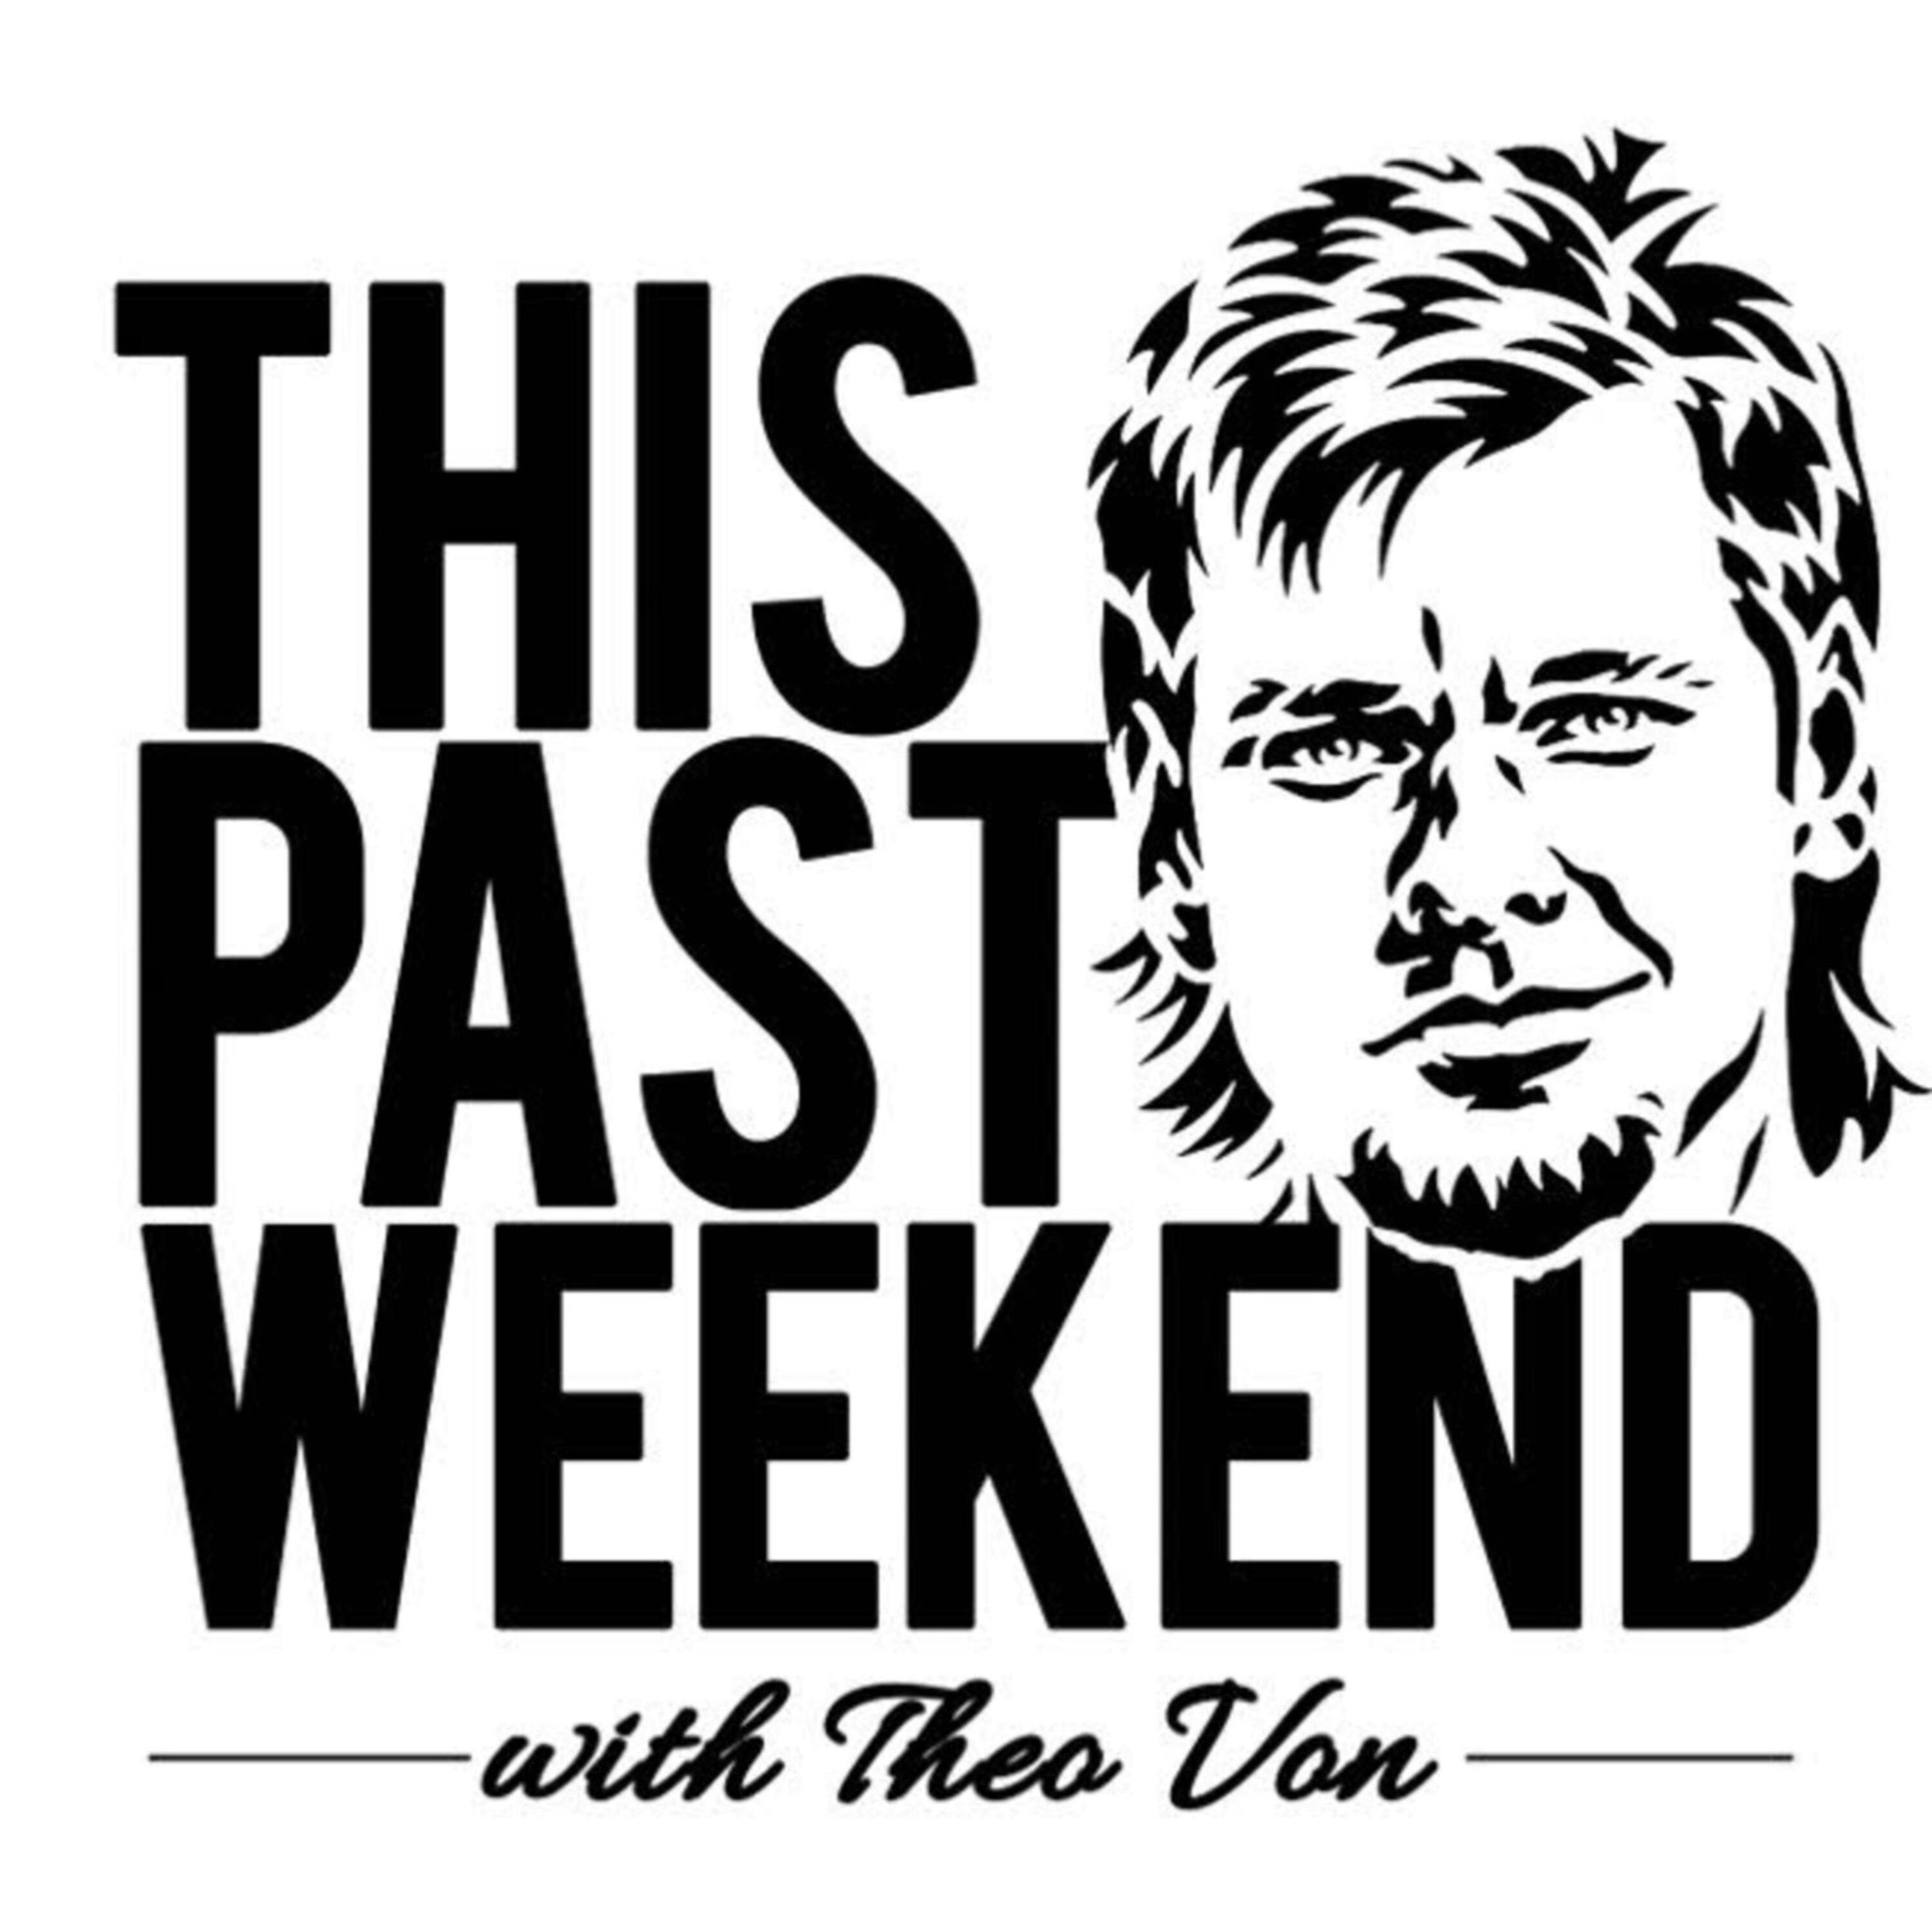 Never-ending Walmart | This Past Weekend #216 by Theo Von